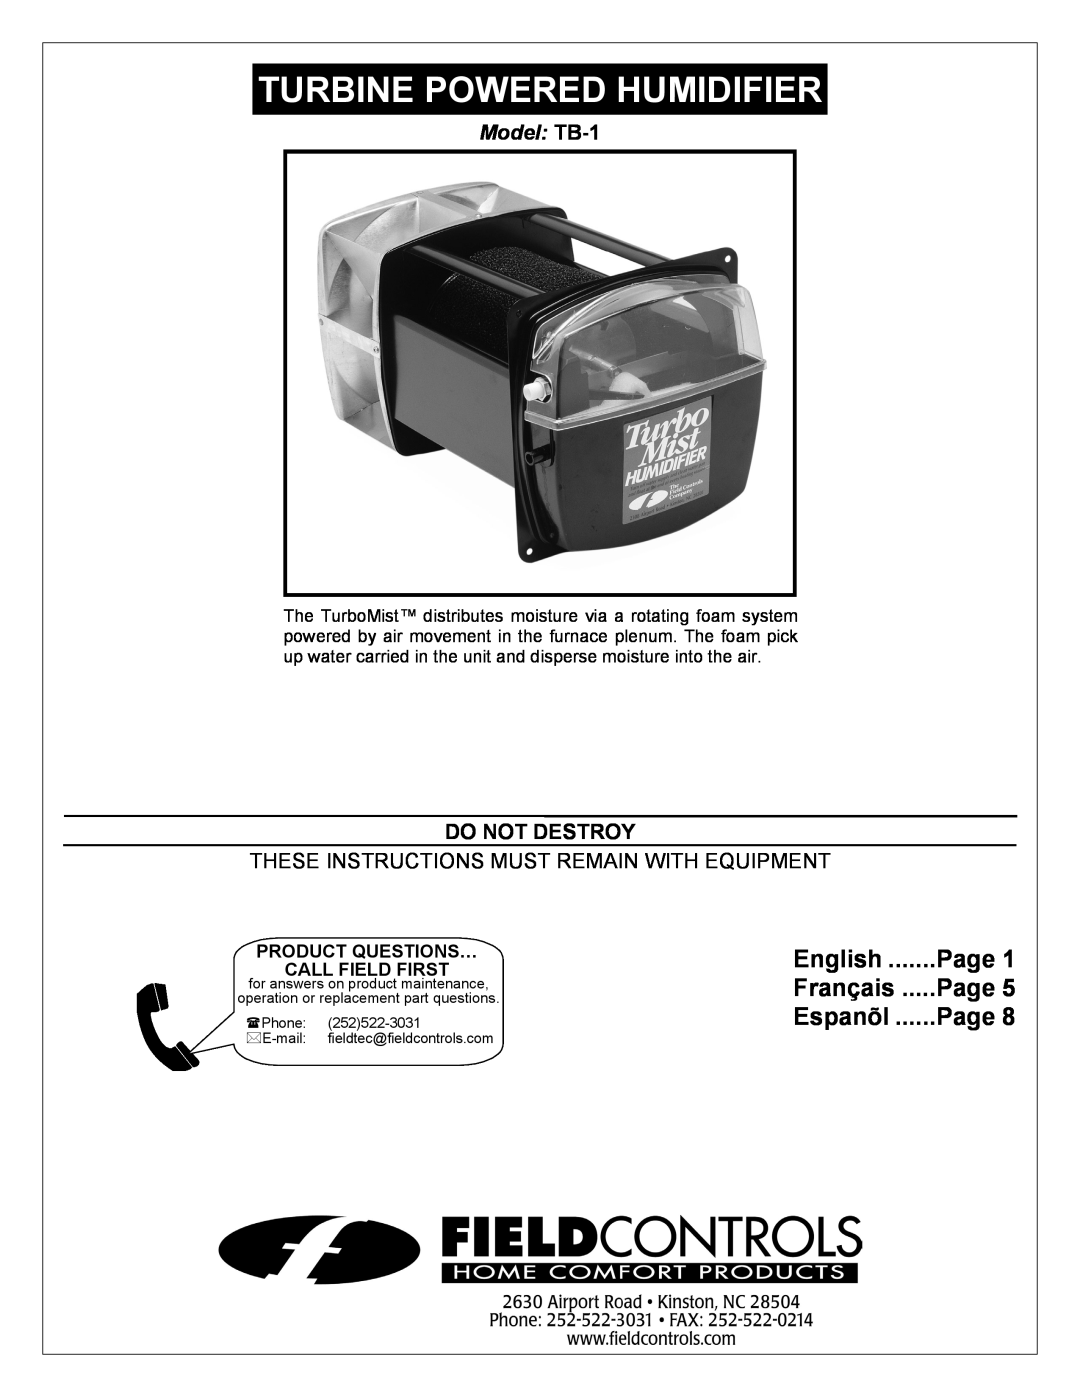 Field Controls manual Turbine Powered Humidifier, Model TB-1, These Instructions Must Remain With Equipment, English 